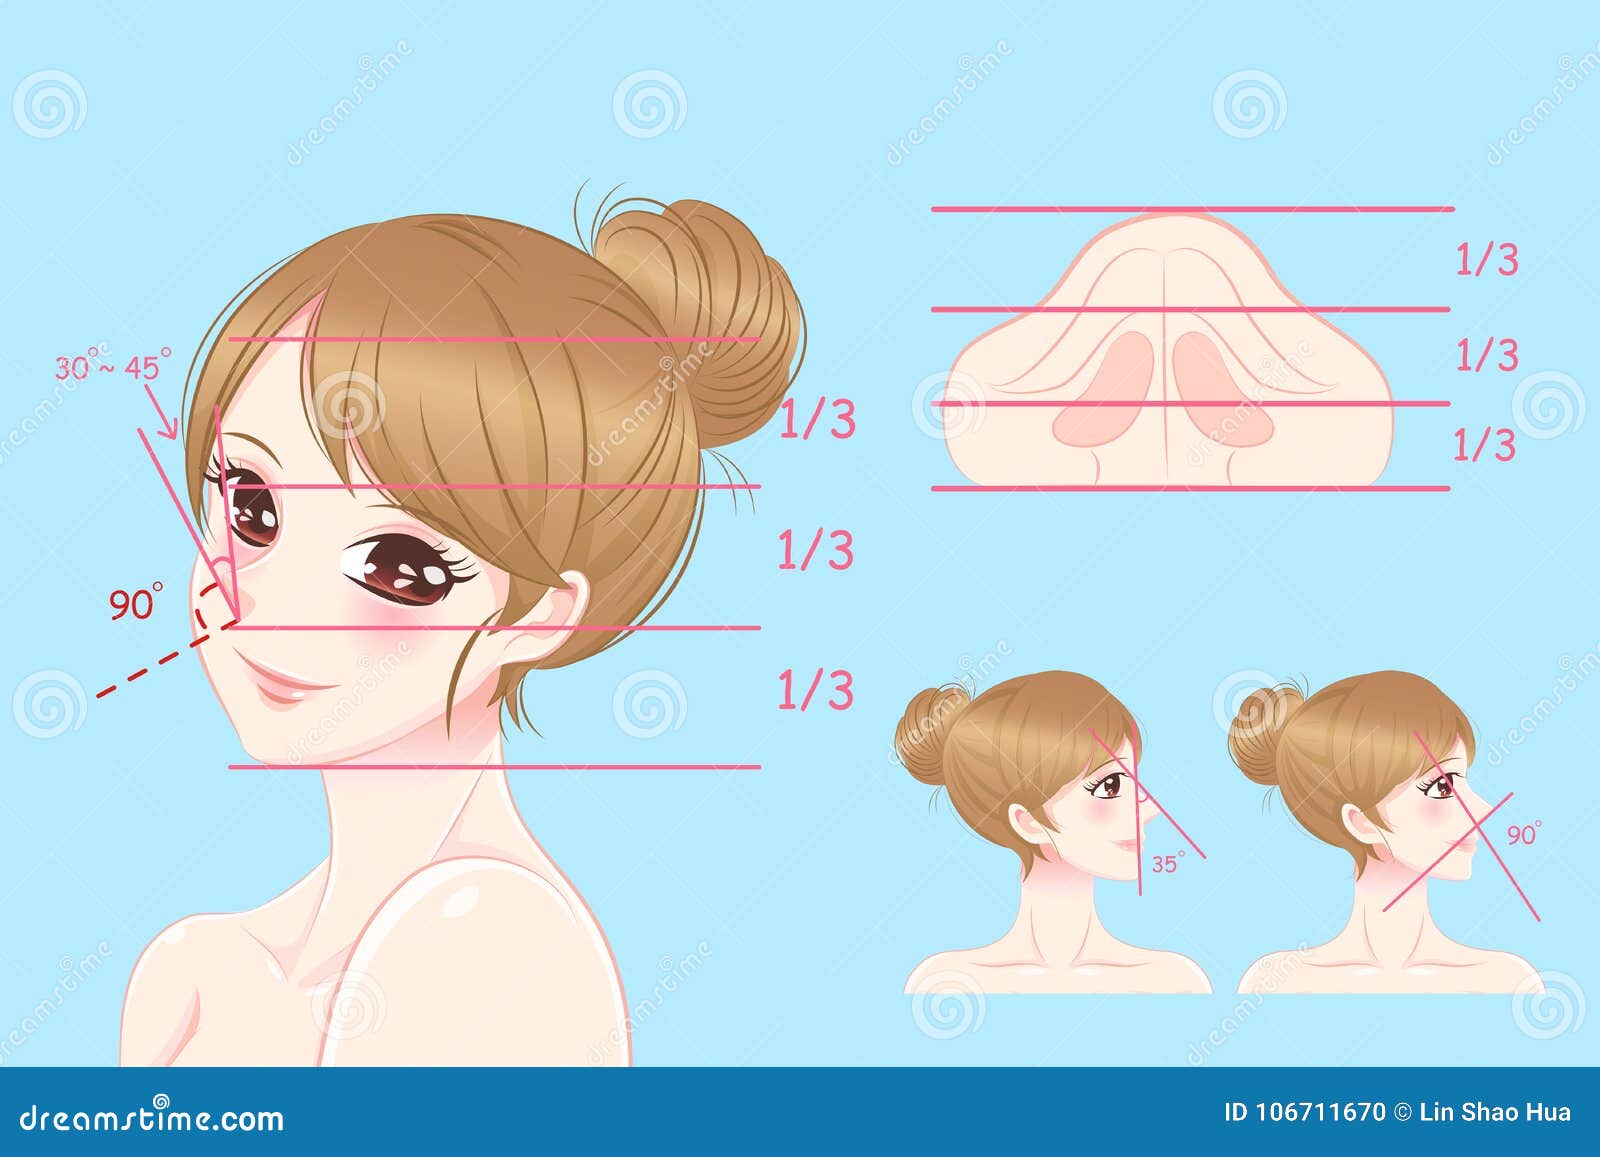 woman with perfect face proportions